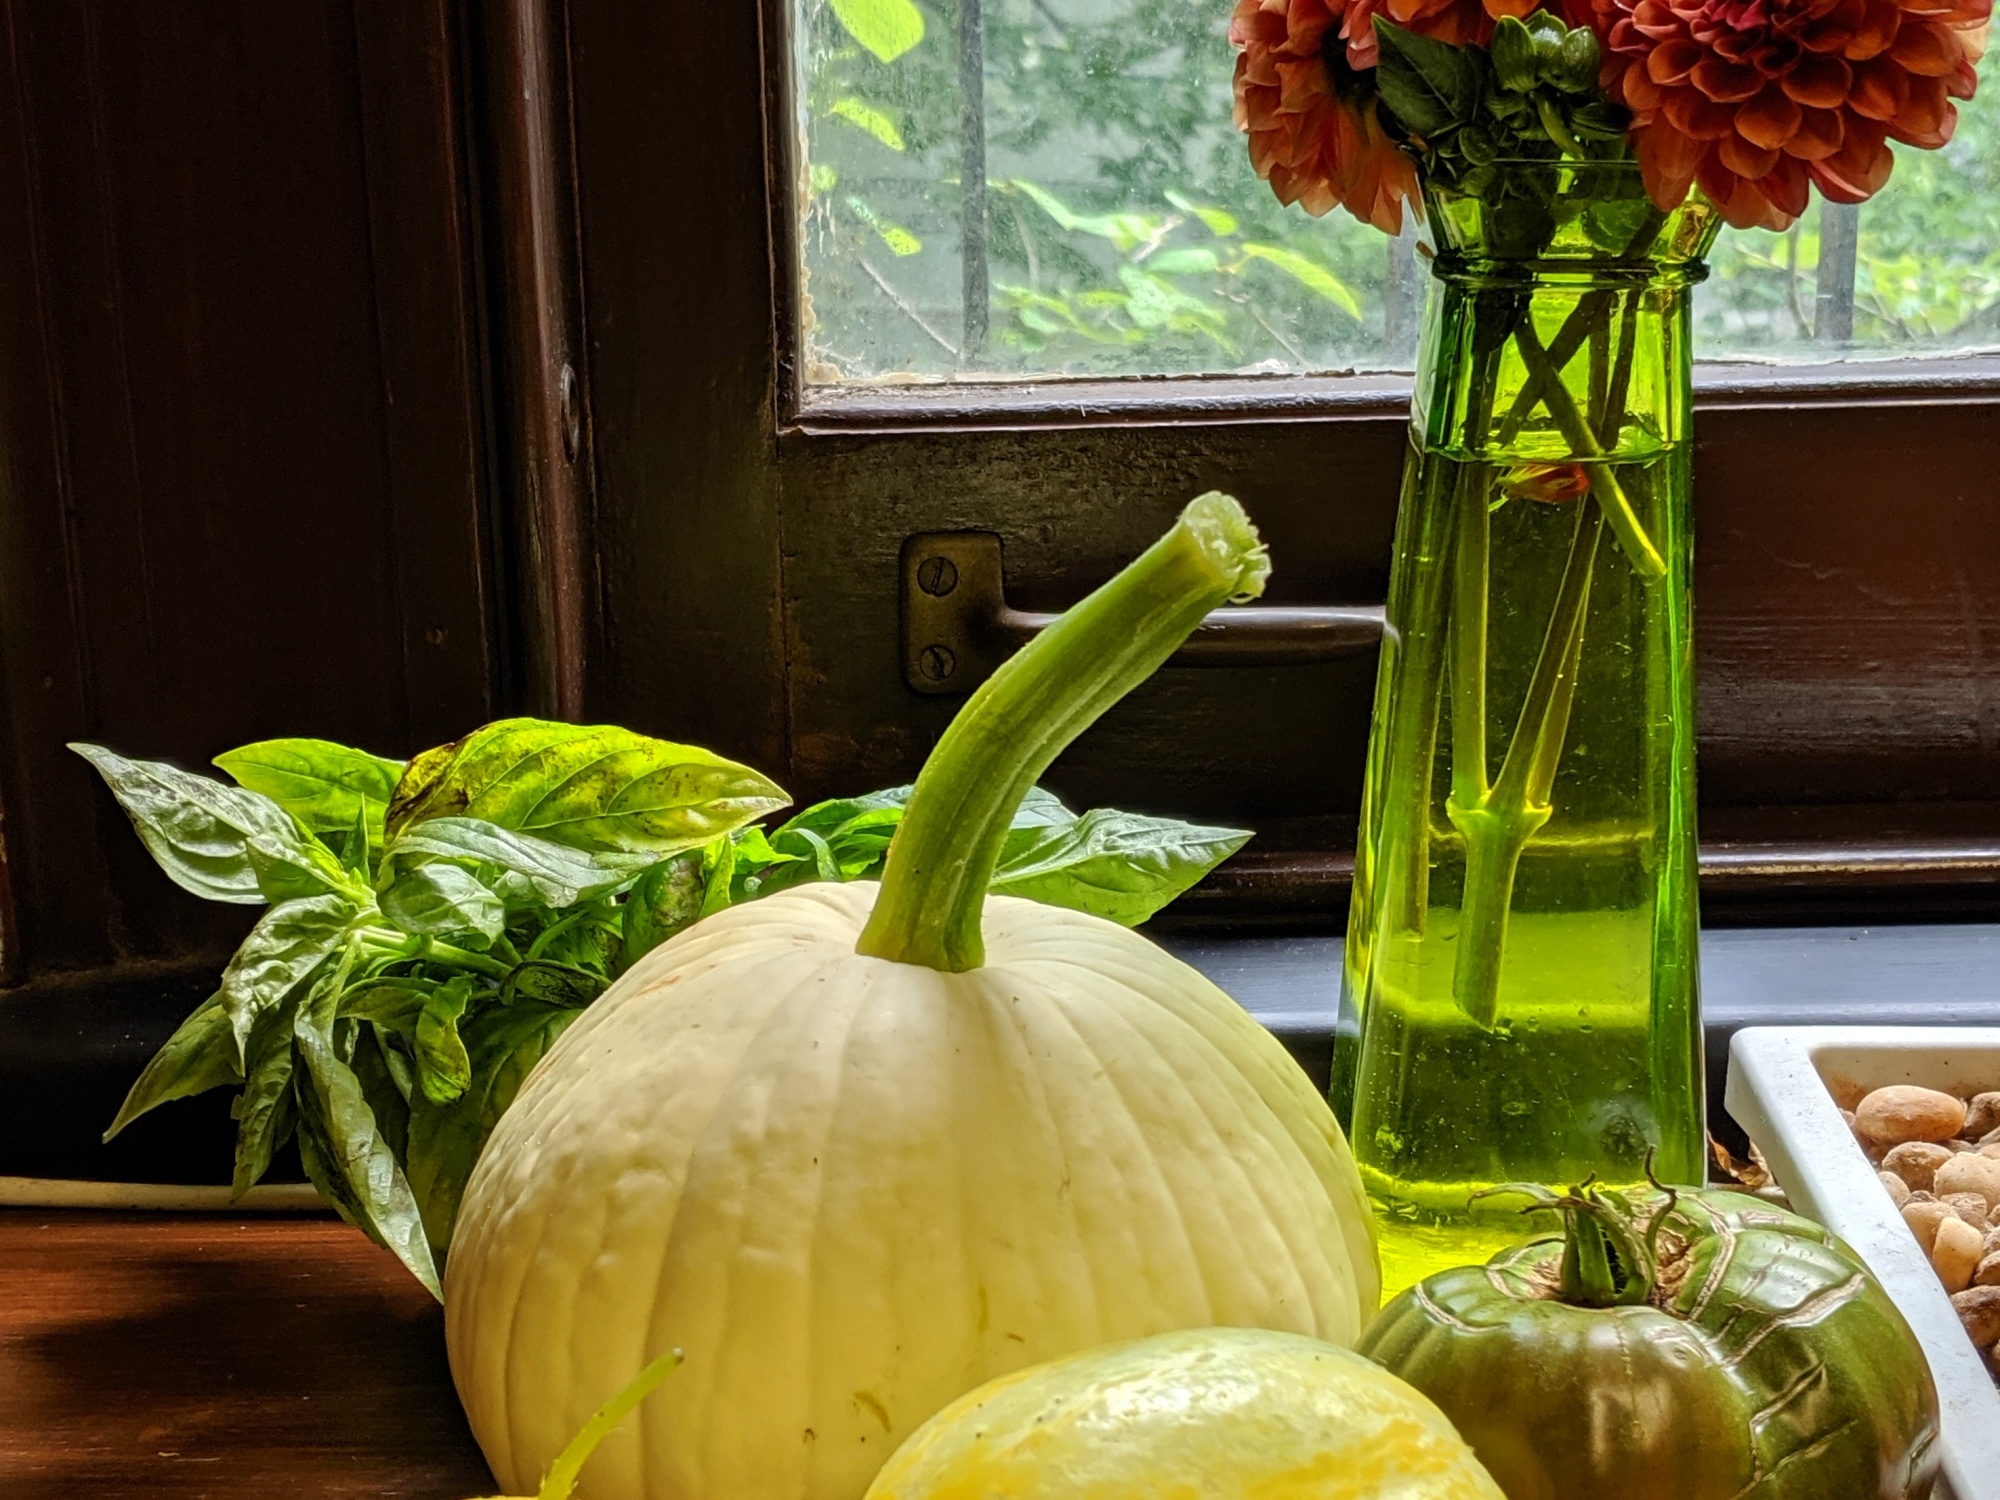 still life showing freshly picked late summer produce, cucumber, tomato, basil, gourd, zinnia